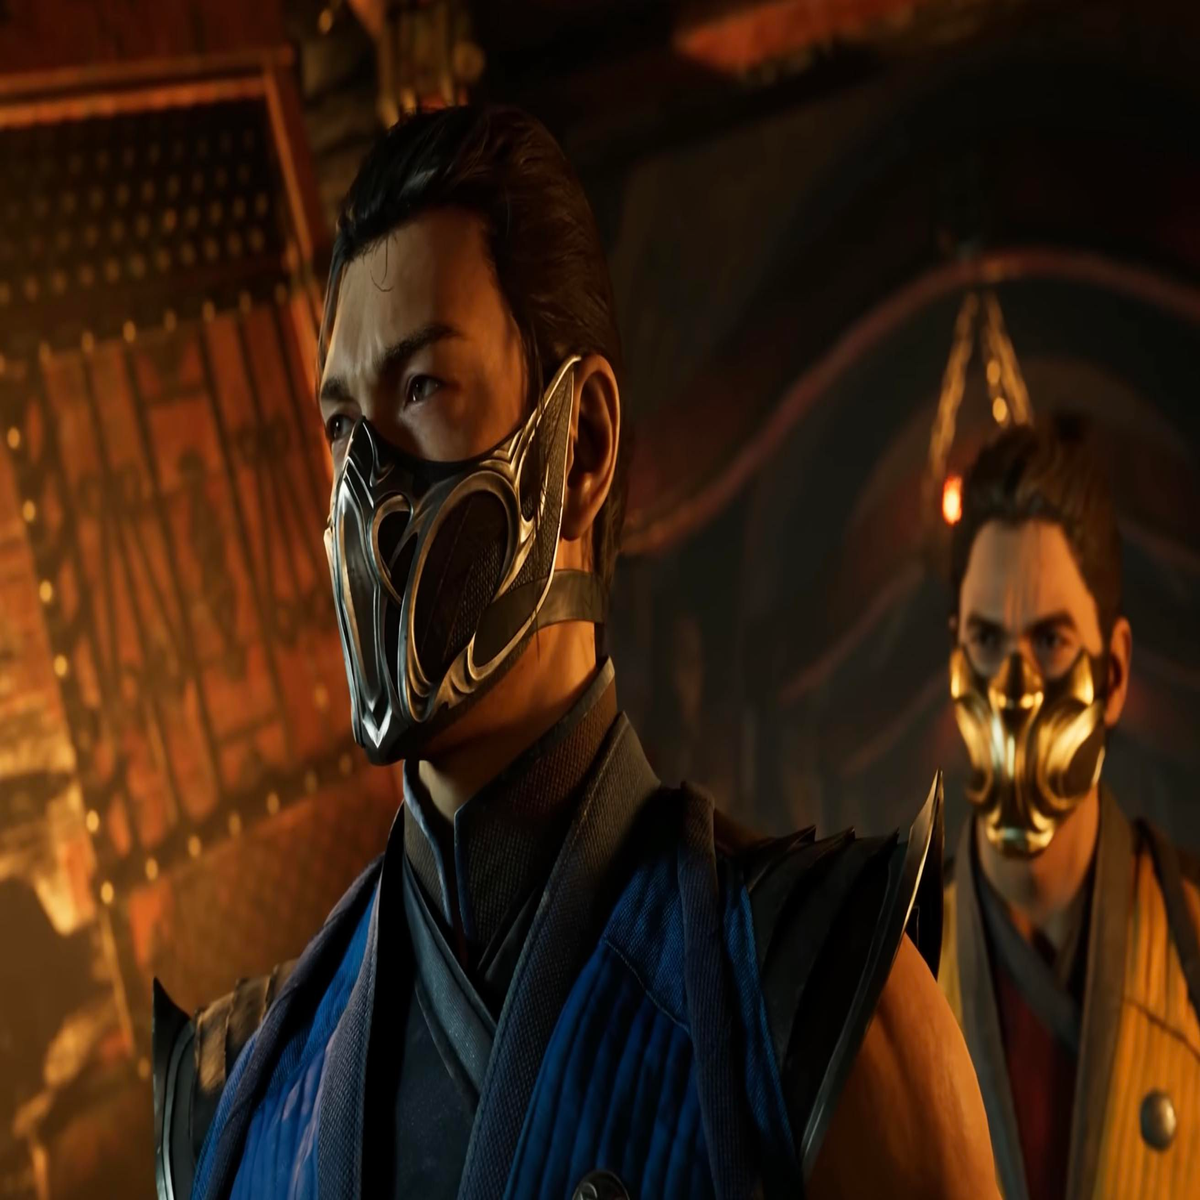 Is Mortal Kombat 1 on PS4 and Xbox One? 